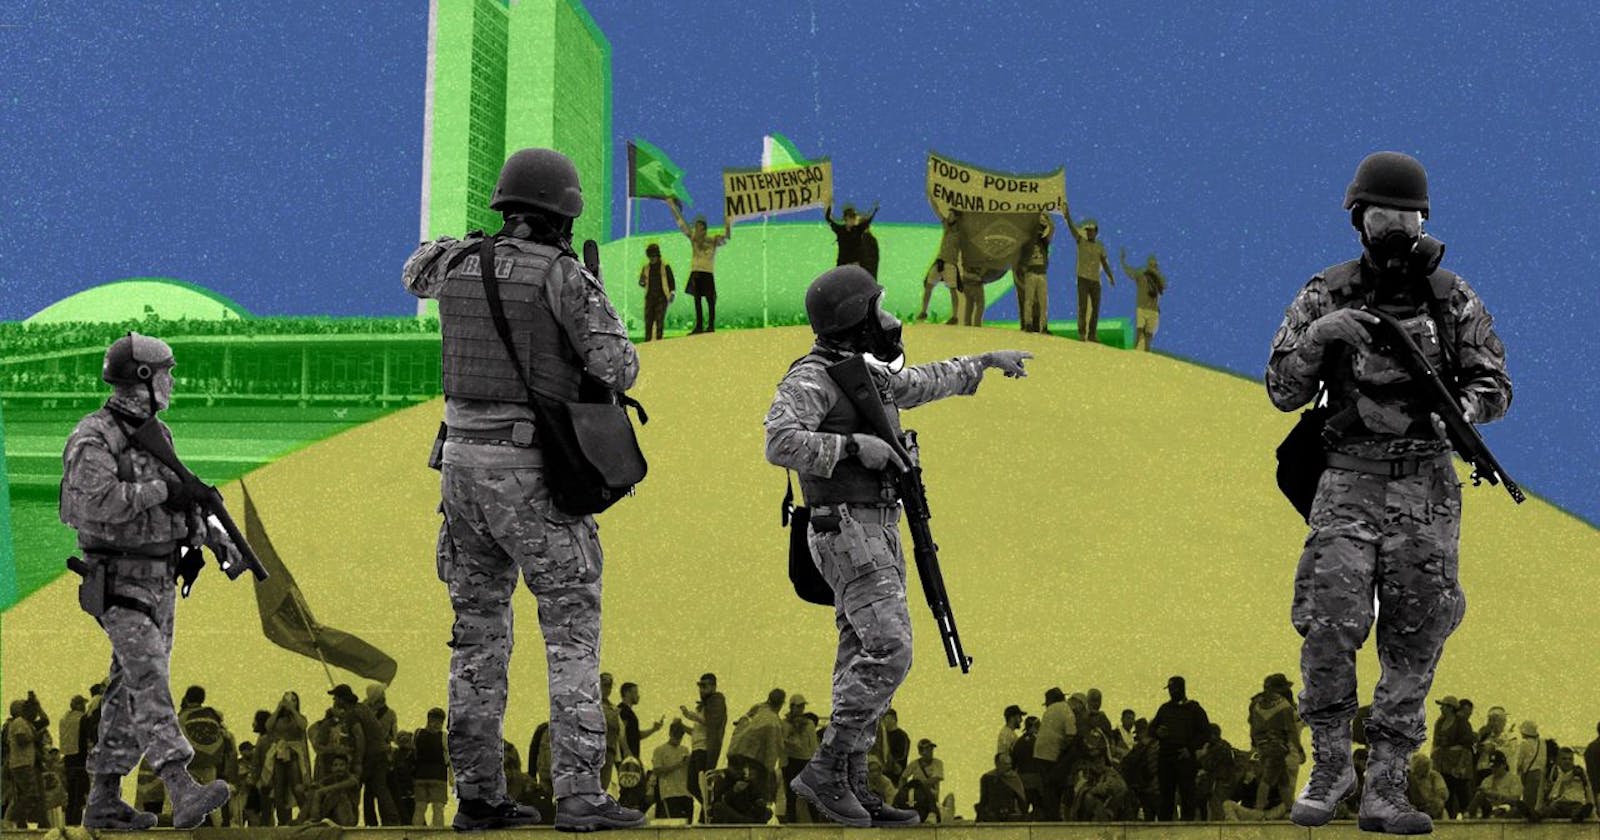 ‘Command your troops, damn it!’ How a series of security failures opened a path to insurrection in Brazil